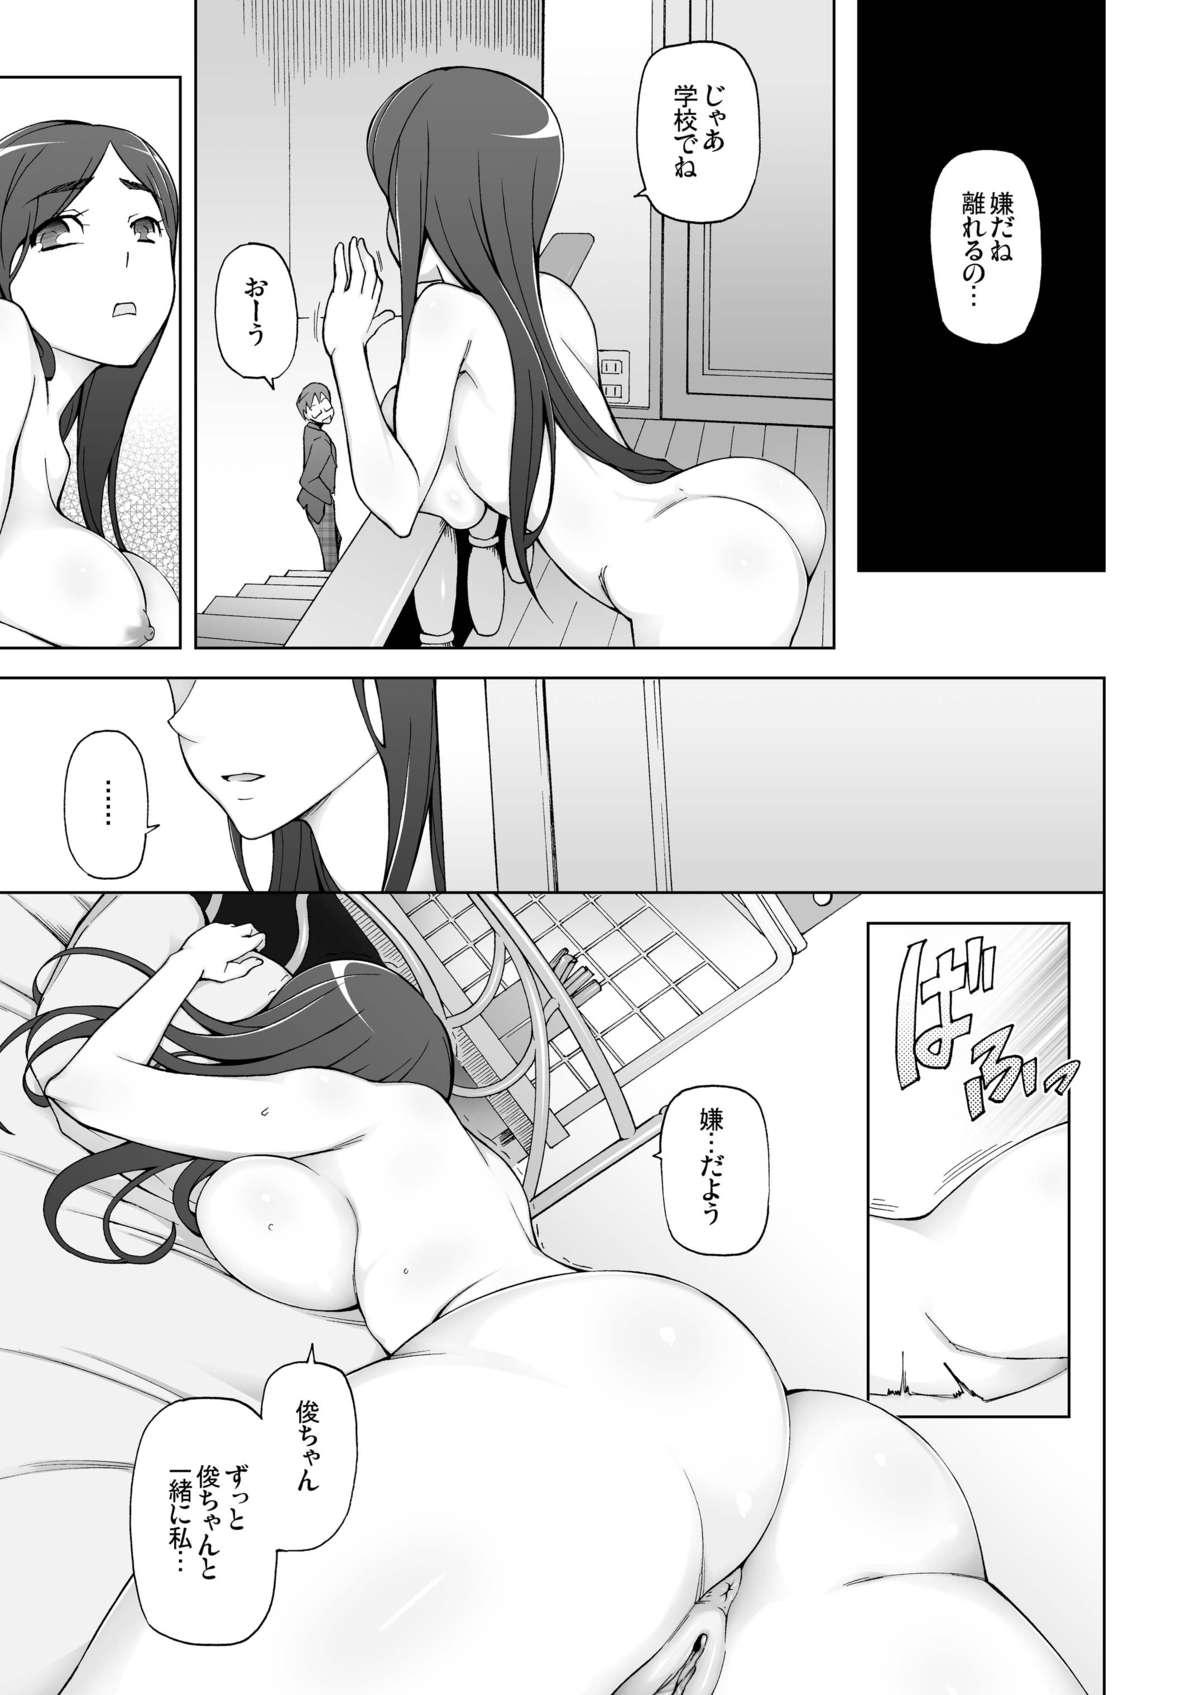 Plumper LUSTFUL BERRY escalate0.5 Hermana - Page 3